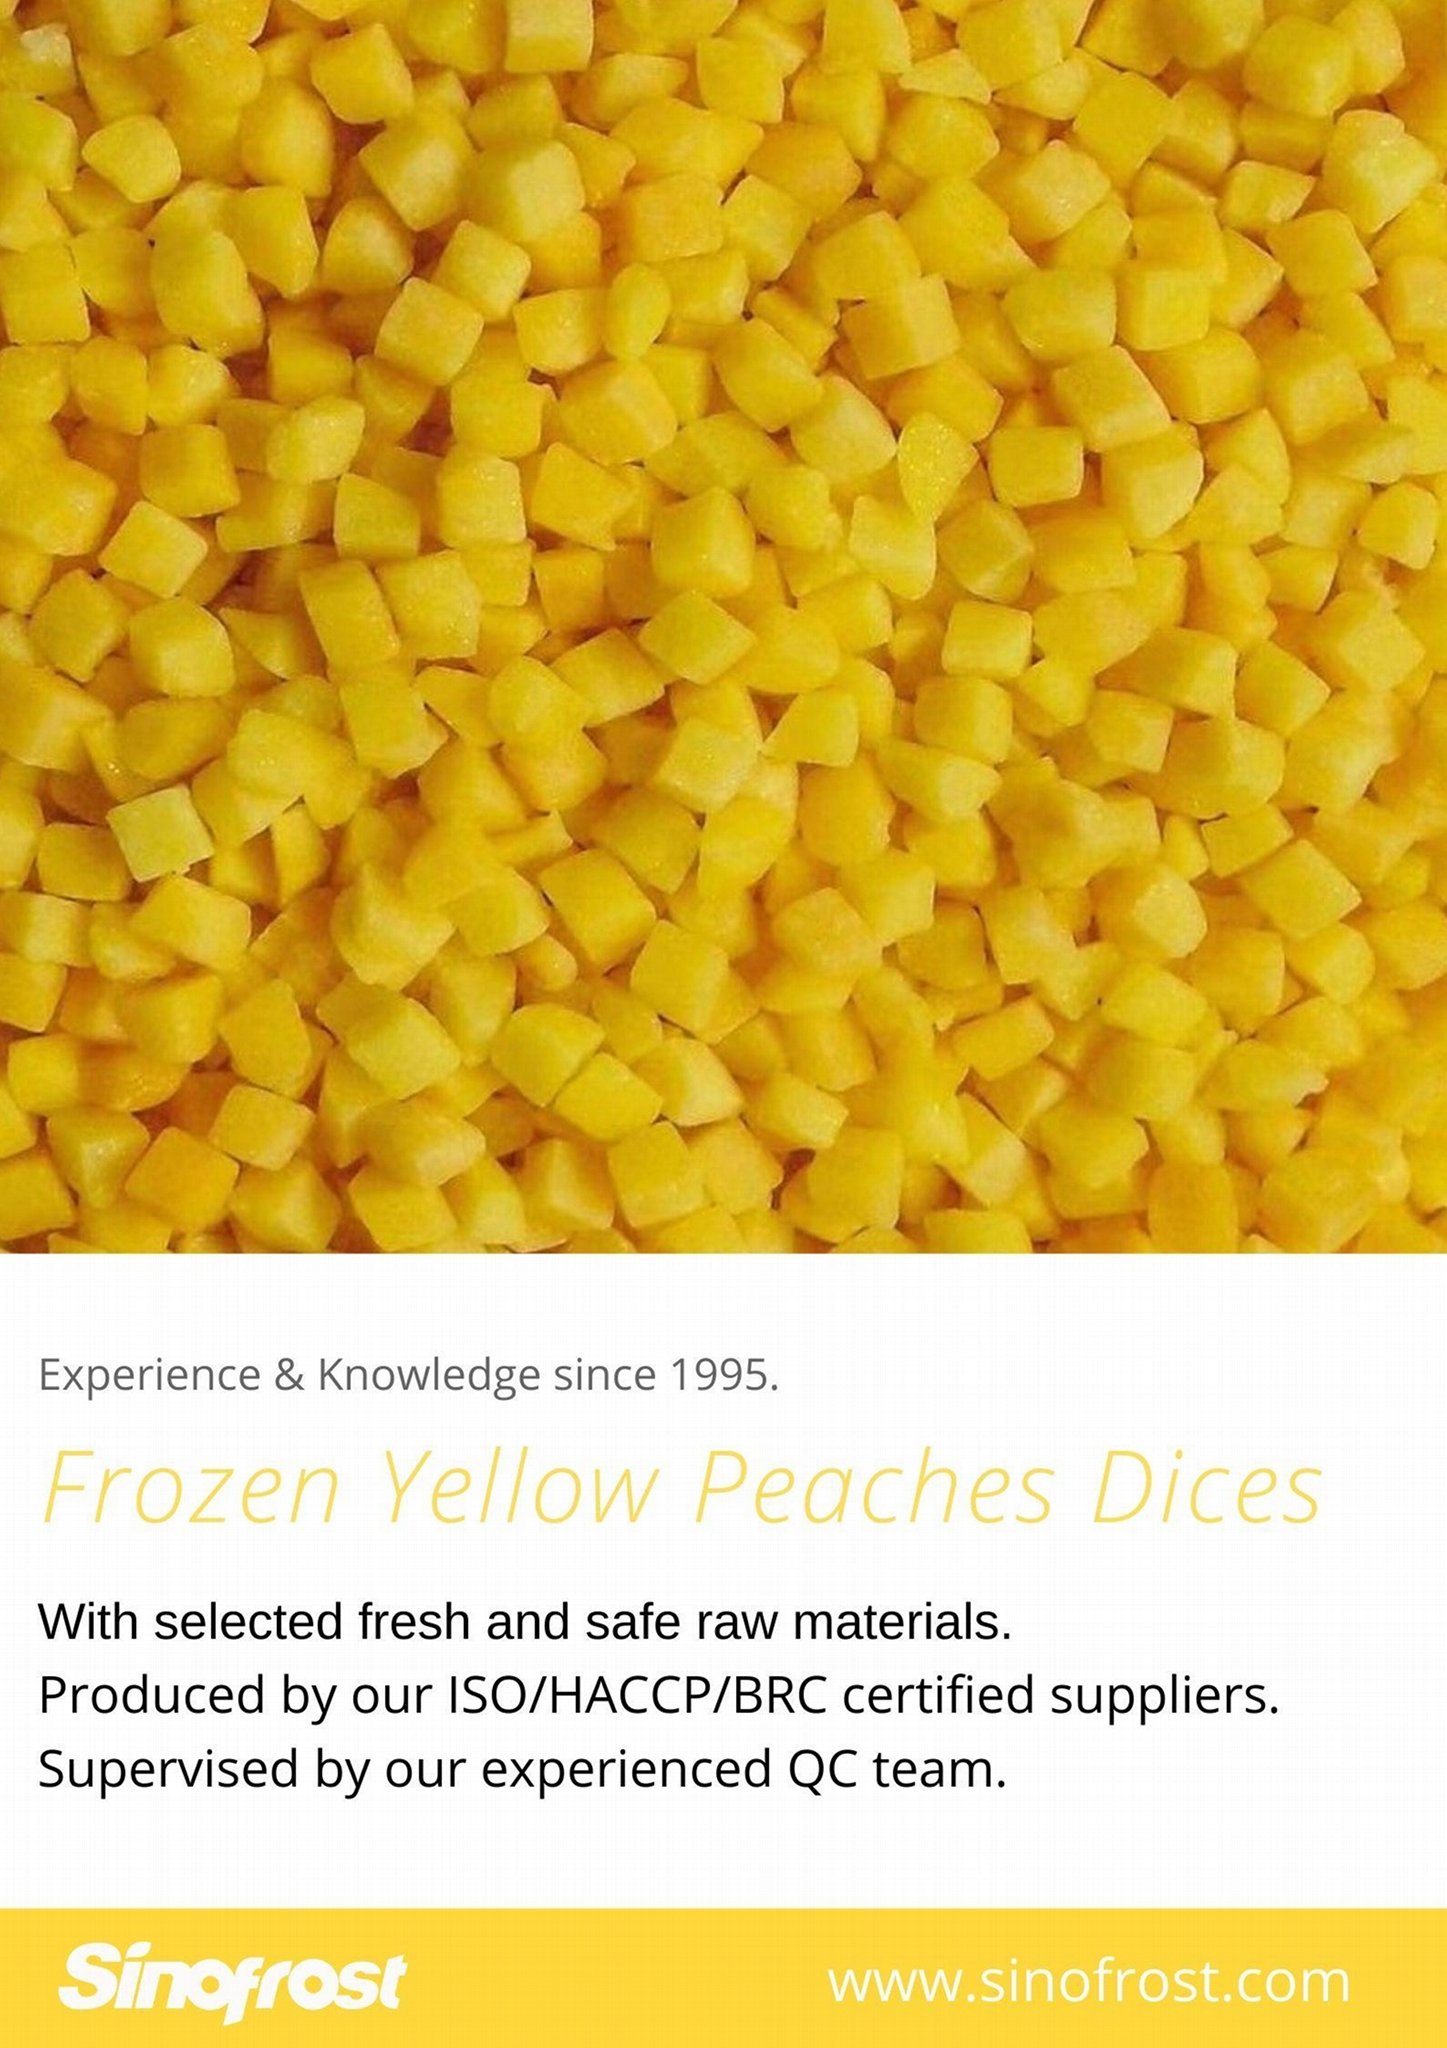 IQF Yellow Peach Dices,Frozen Yellow Peaches Dices,IQF Yellow Peach Cubes 2